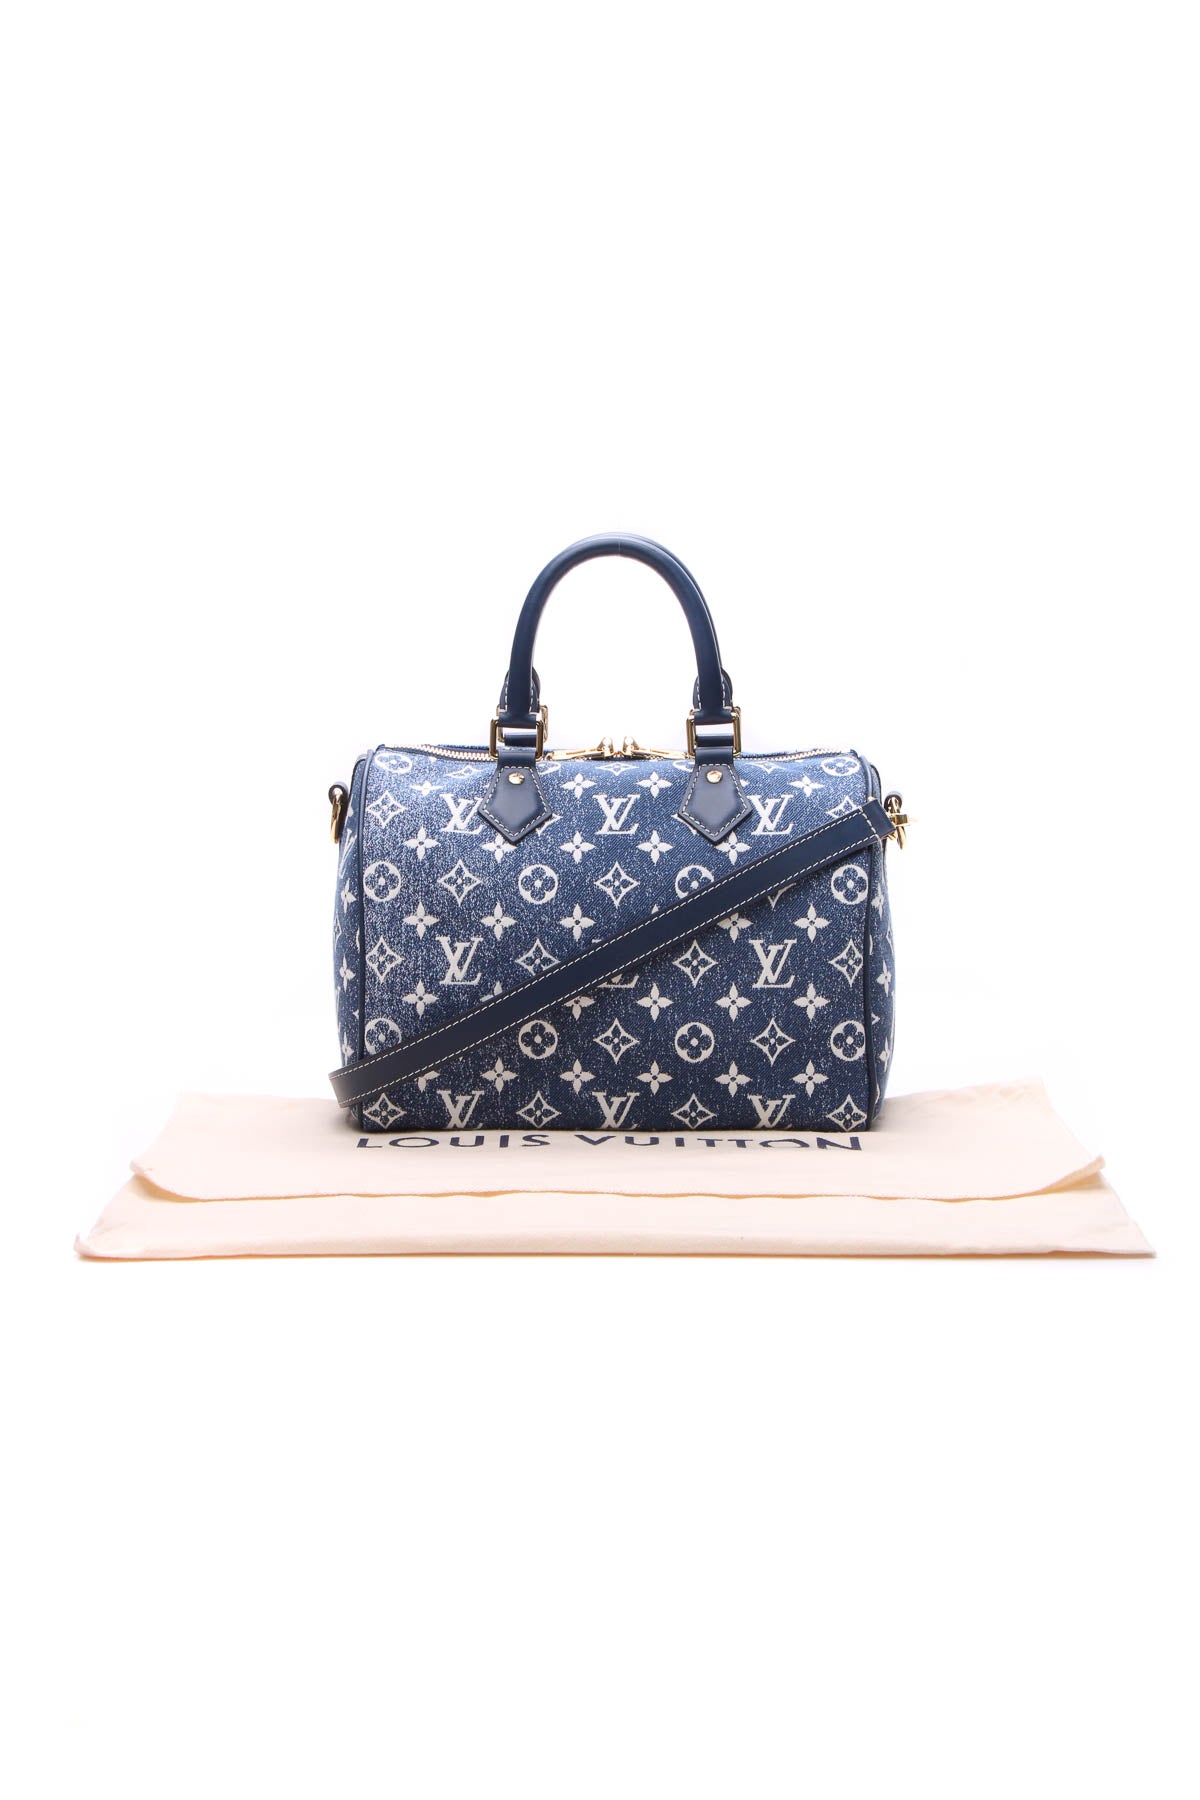 Welcome to the Return of the Louis Vuitton Speedy Bag